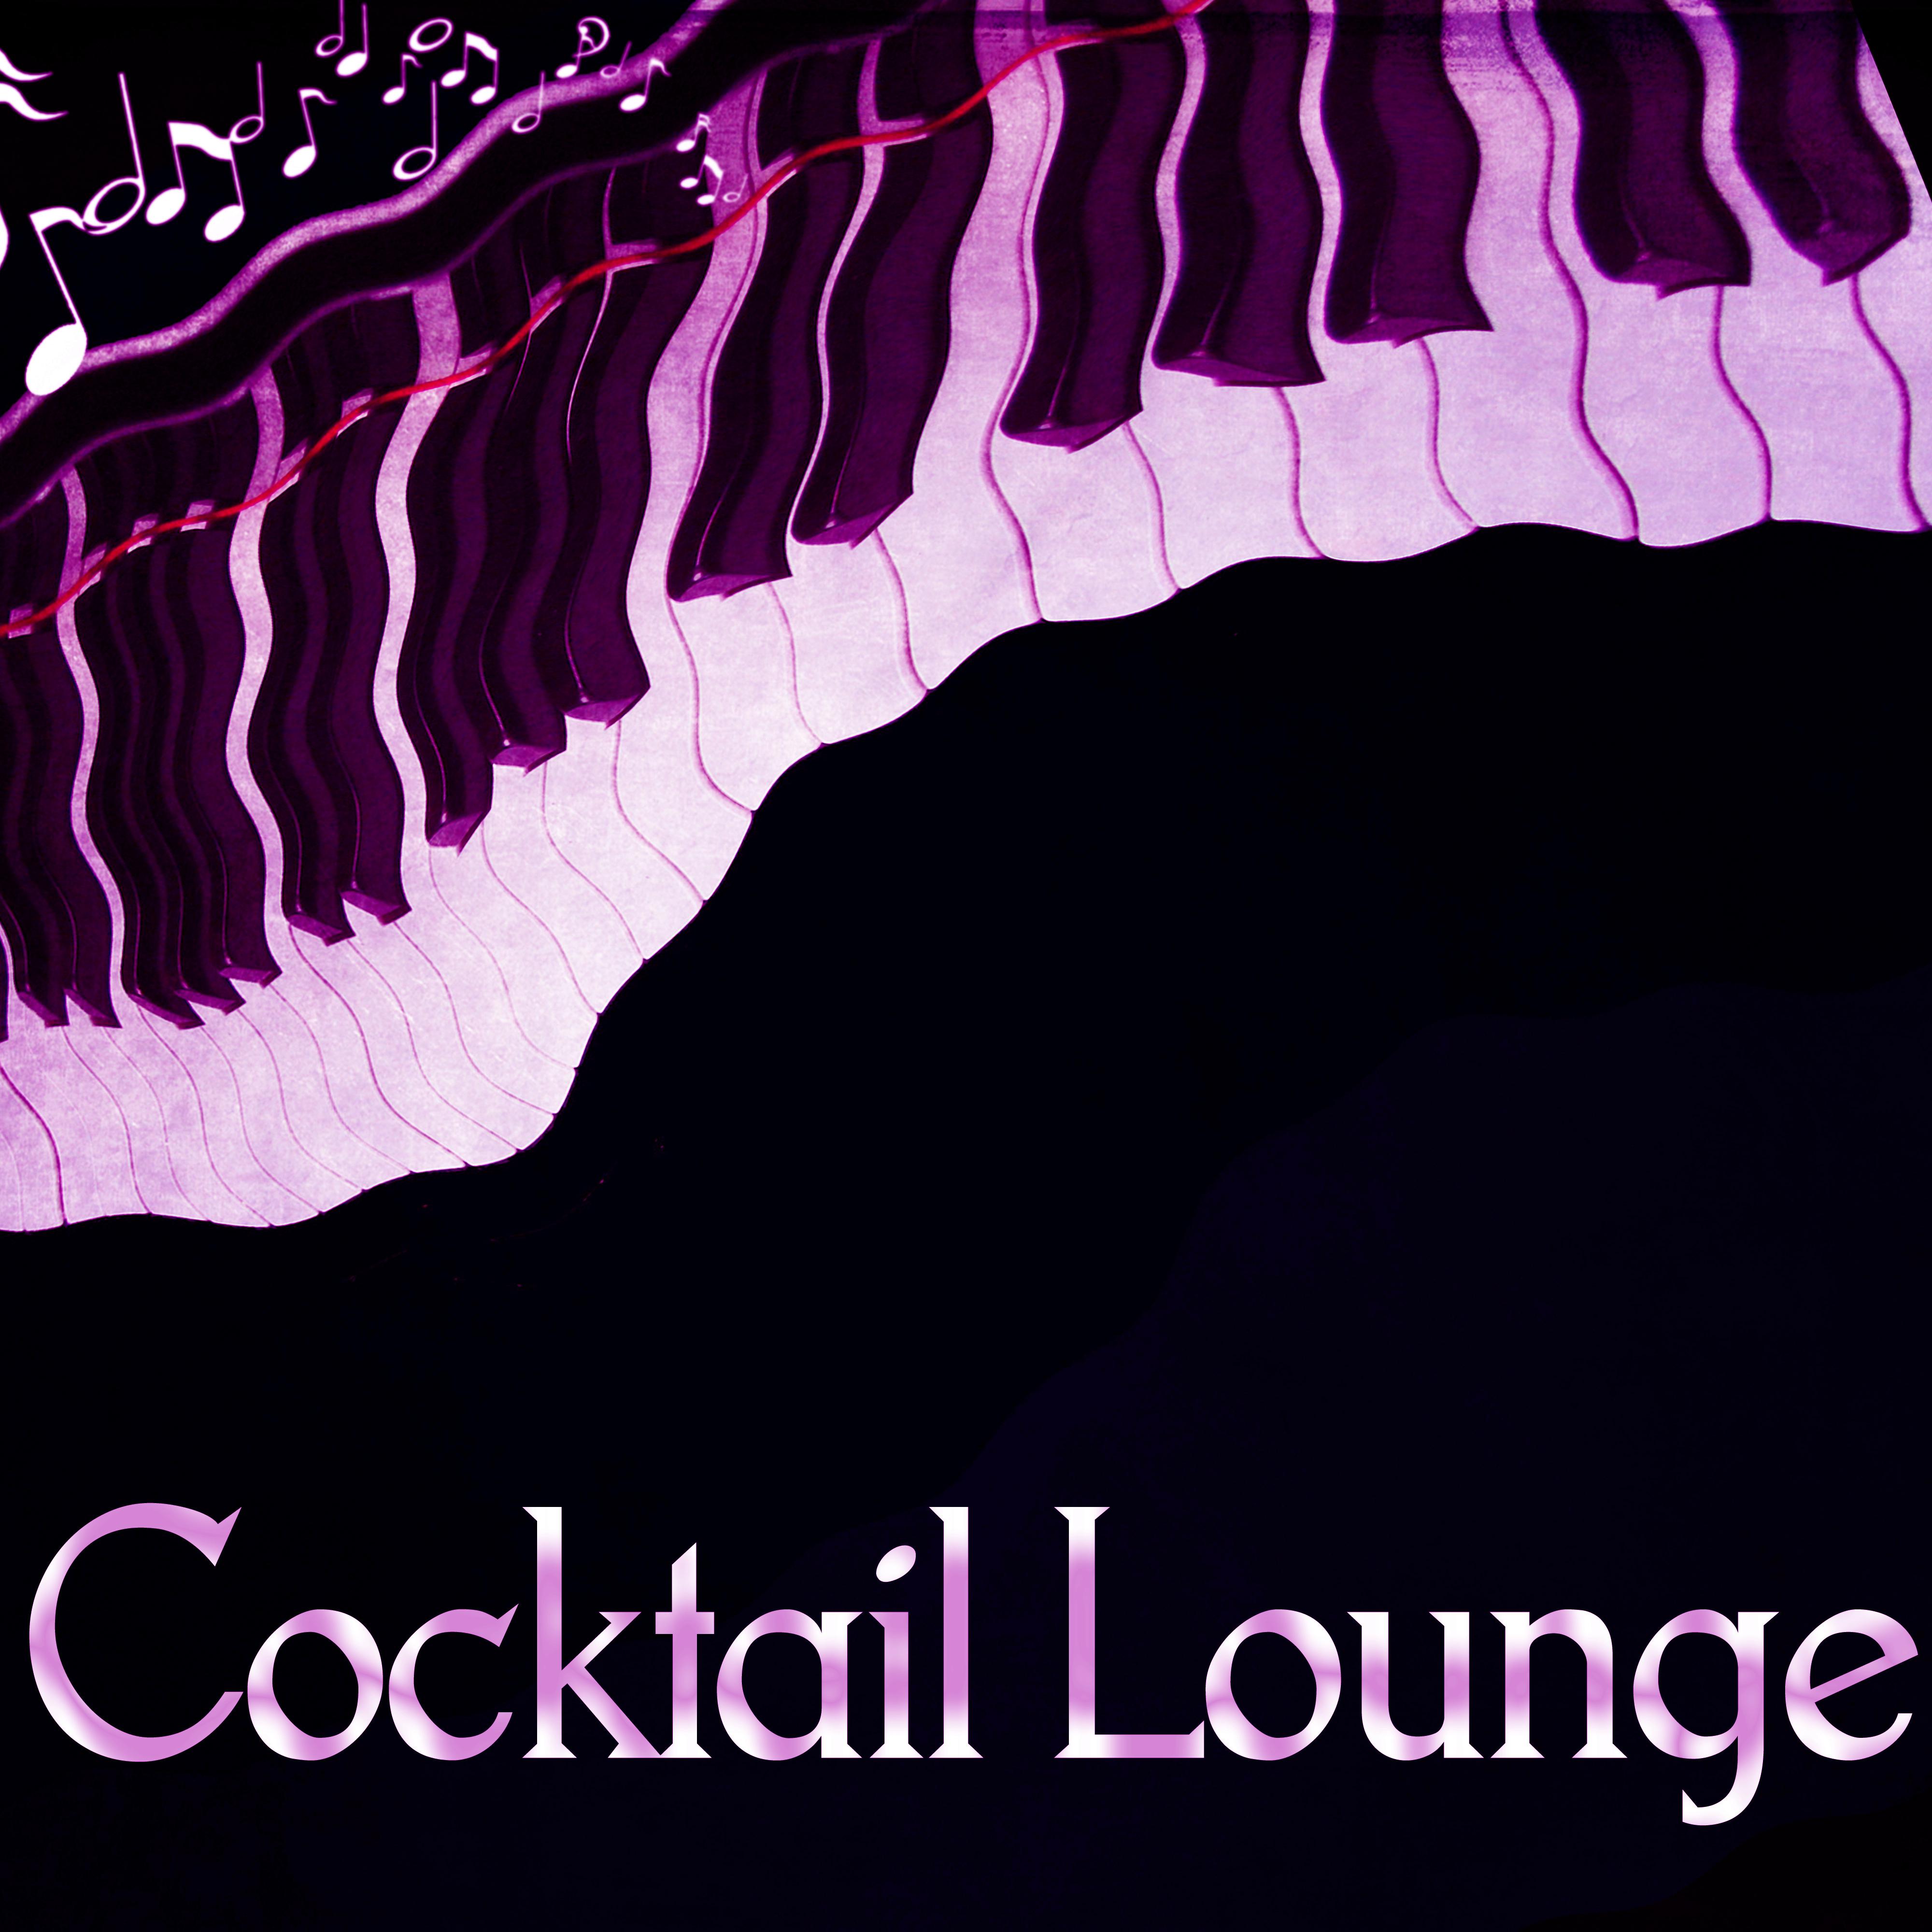 Cocktail Lounge  Soft Piano Music, Easy Listening, Smooth Jazz, Jazz Day  Night